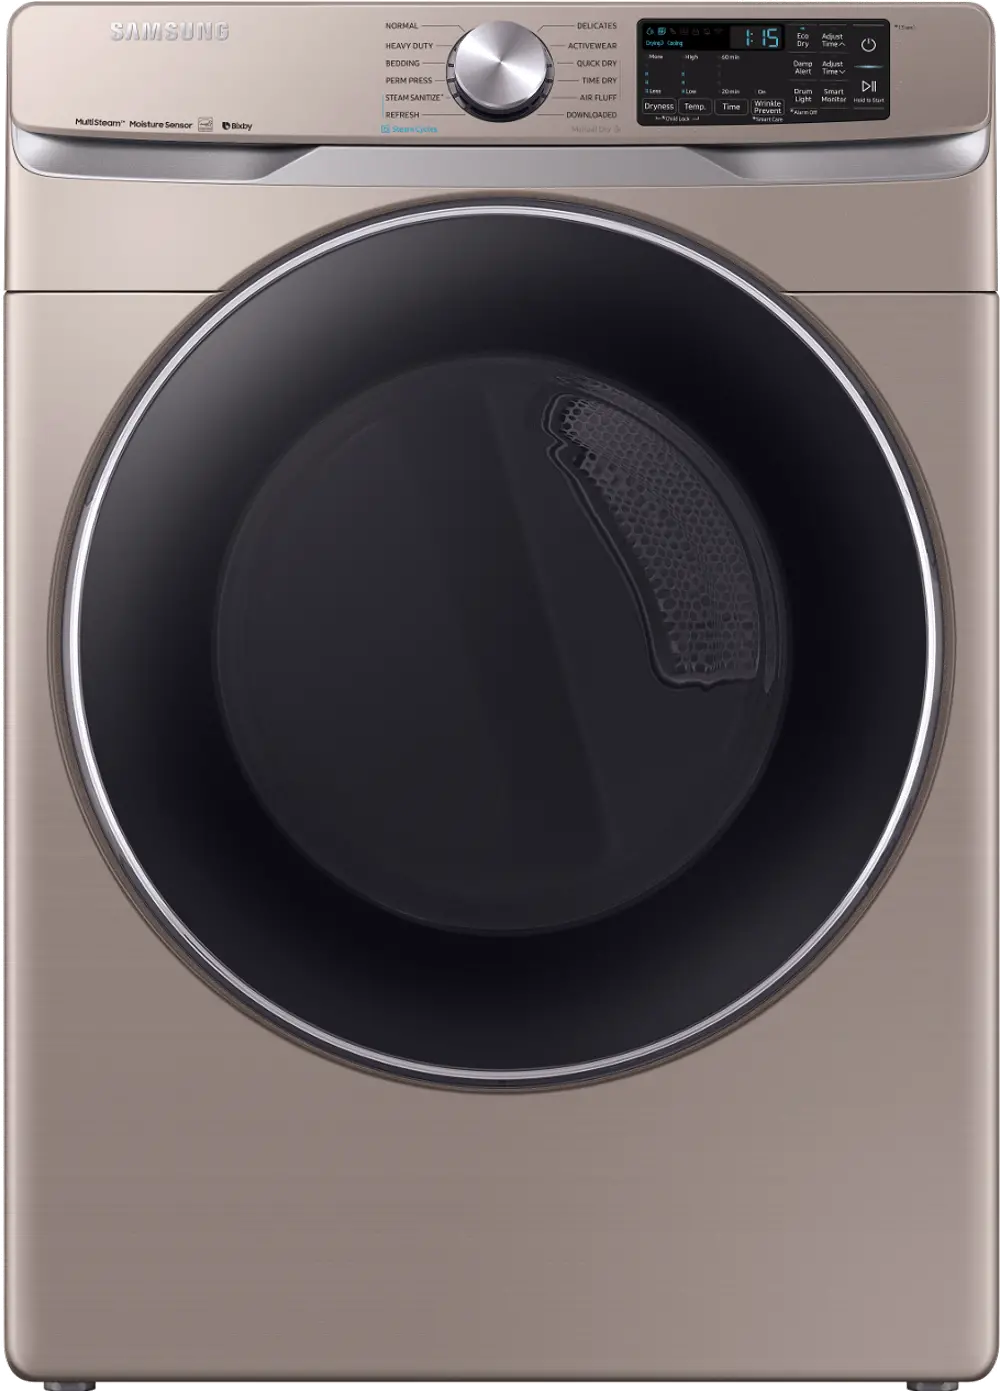 DVG45R6300C Samsung Bixby Enabled Gas Dryer - 7.5 cu. ft. Champagne-1